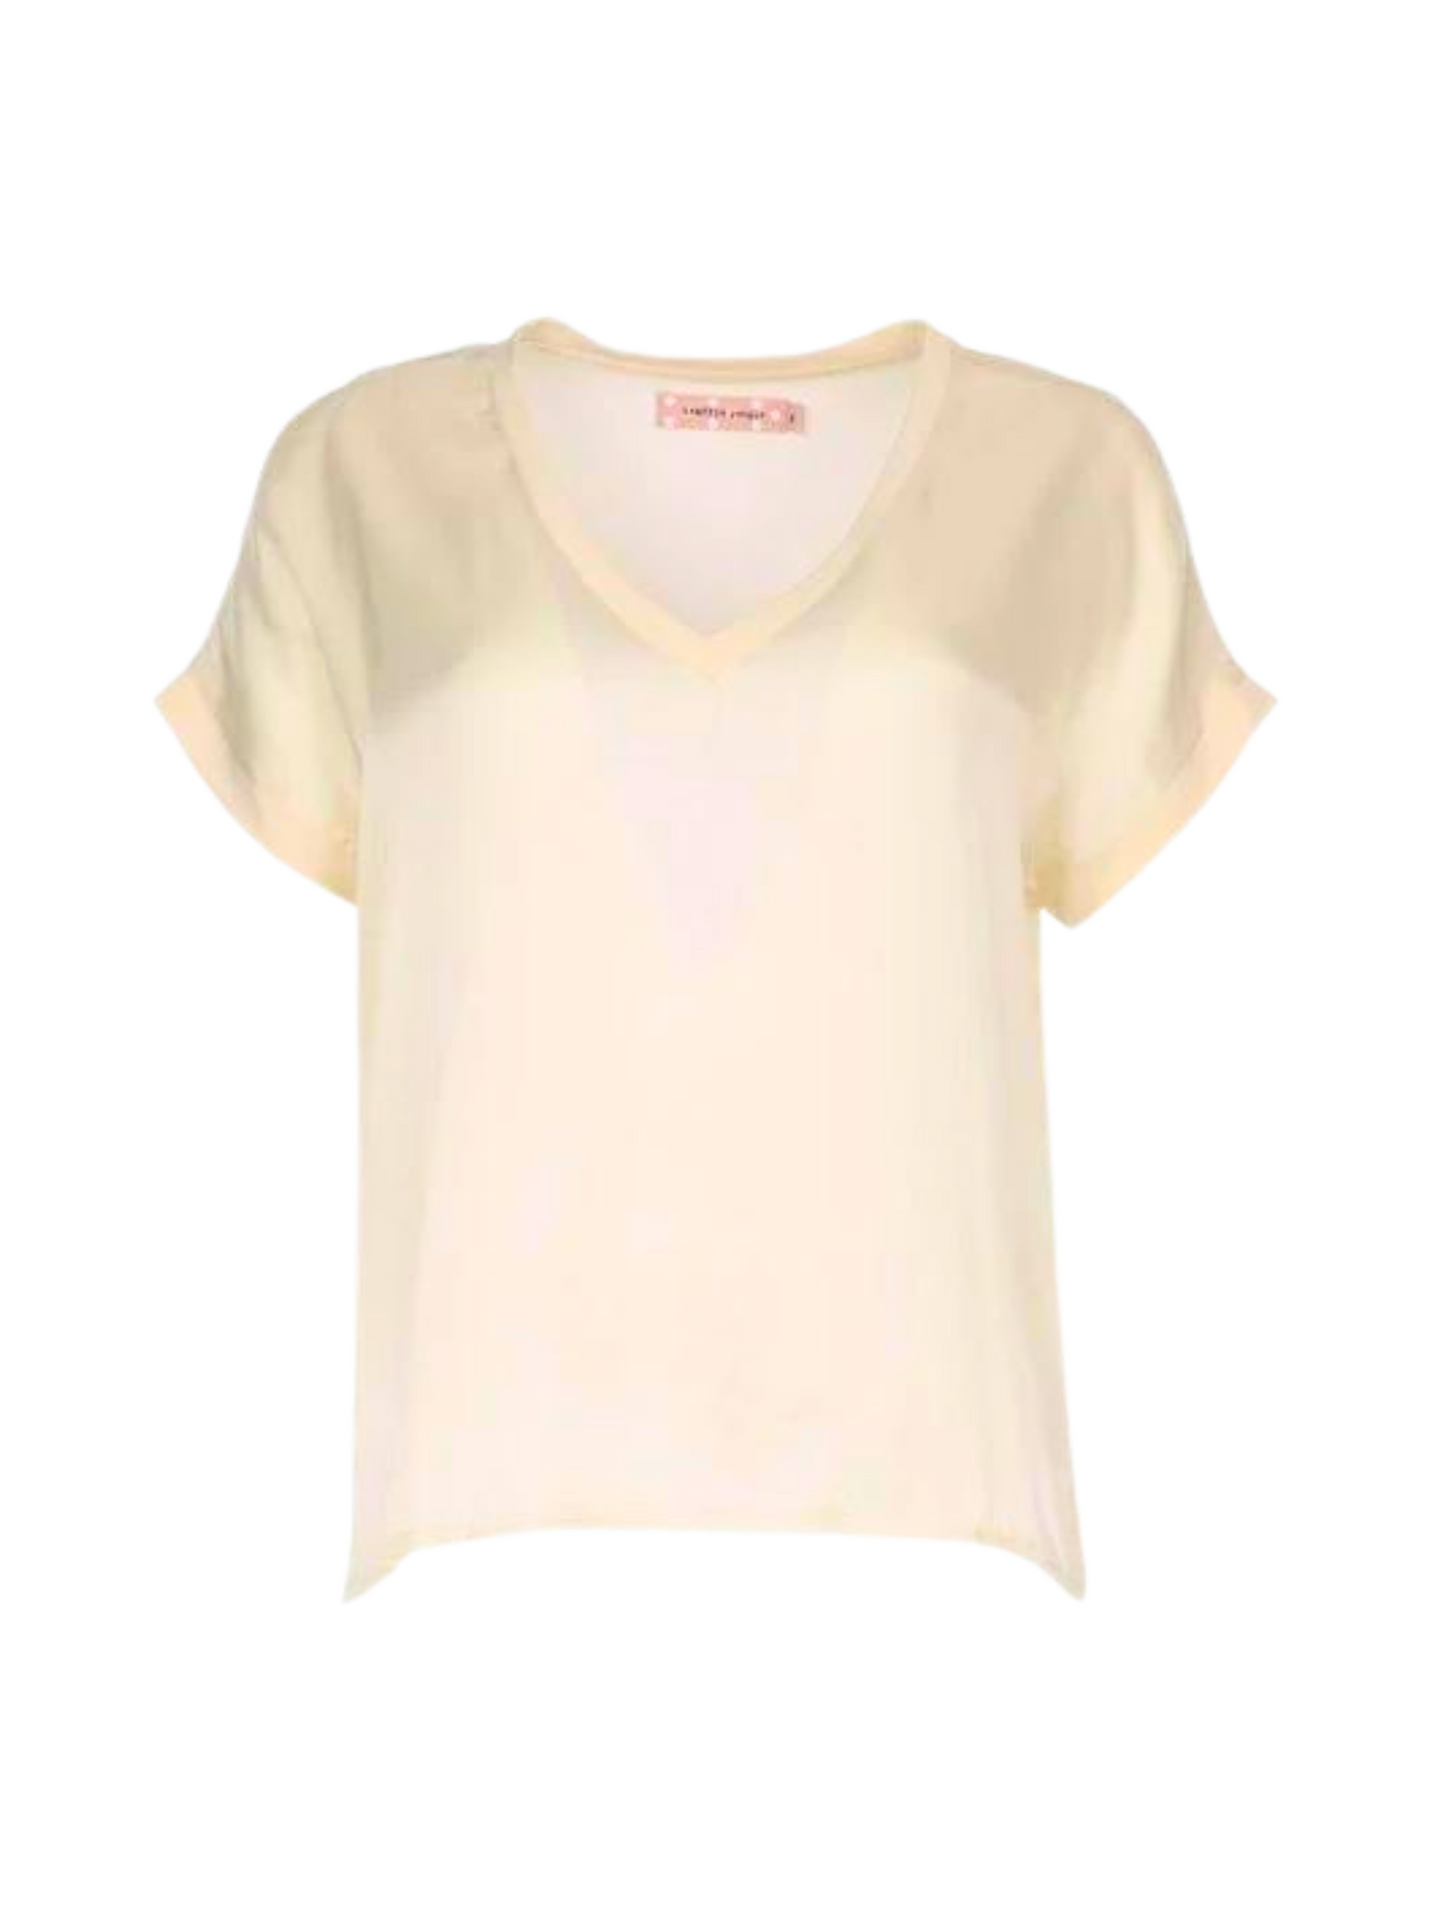 Traffic People Slouch Tee in Cream